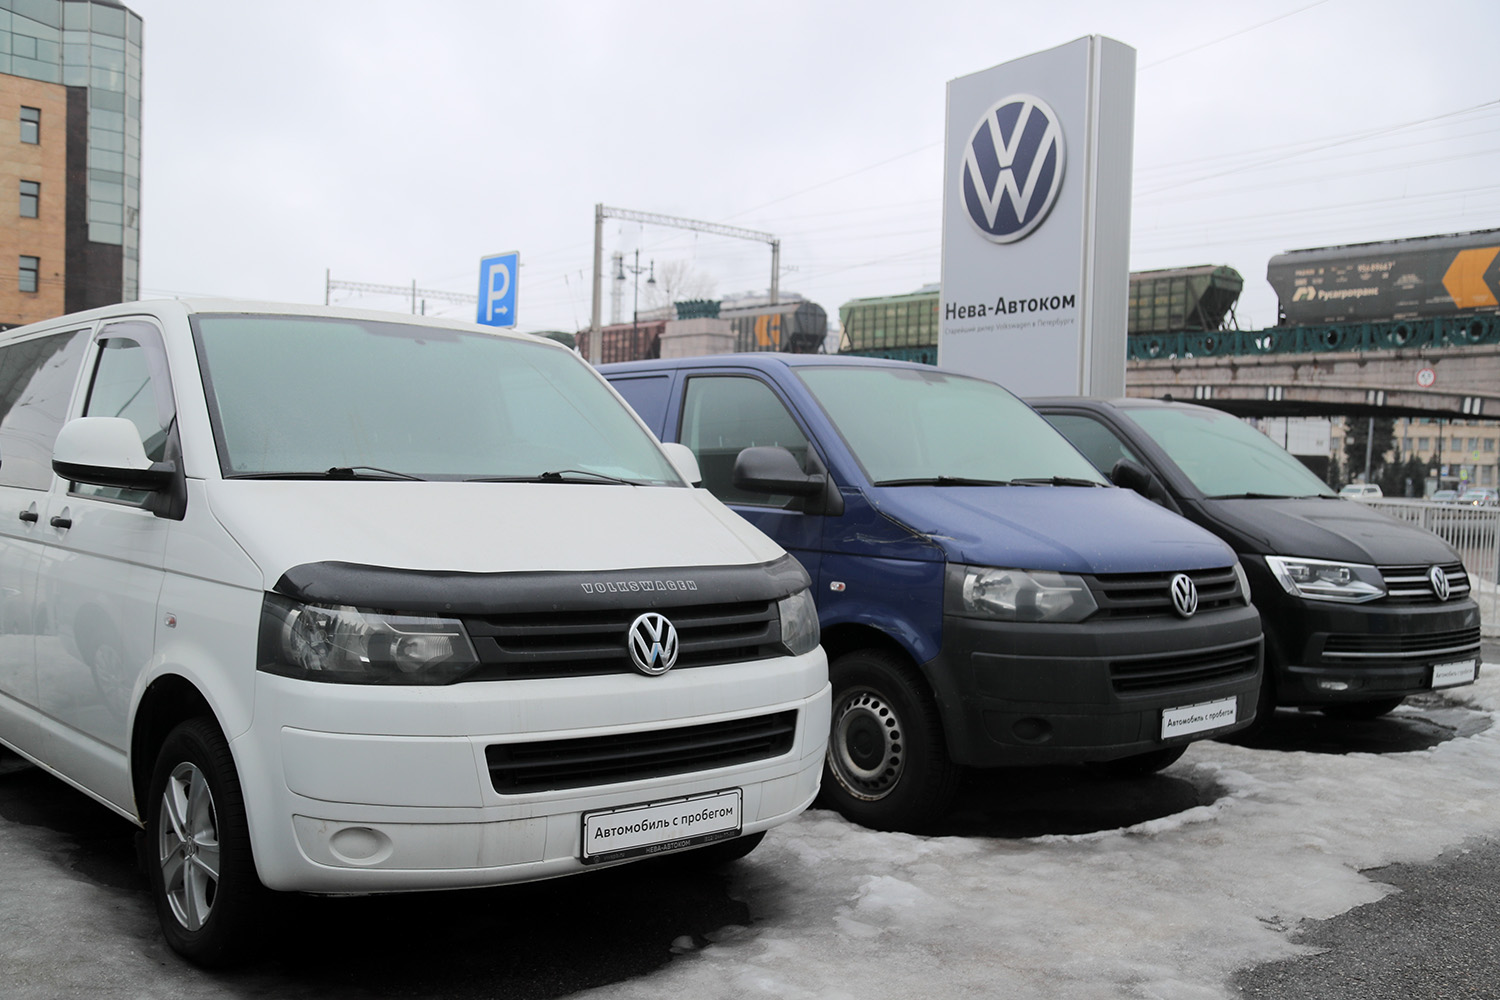 Volkswagen Dealership in St Petersburg Russia full of new cars unsold